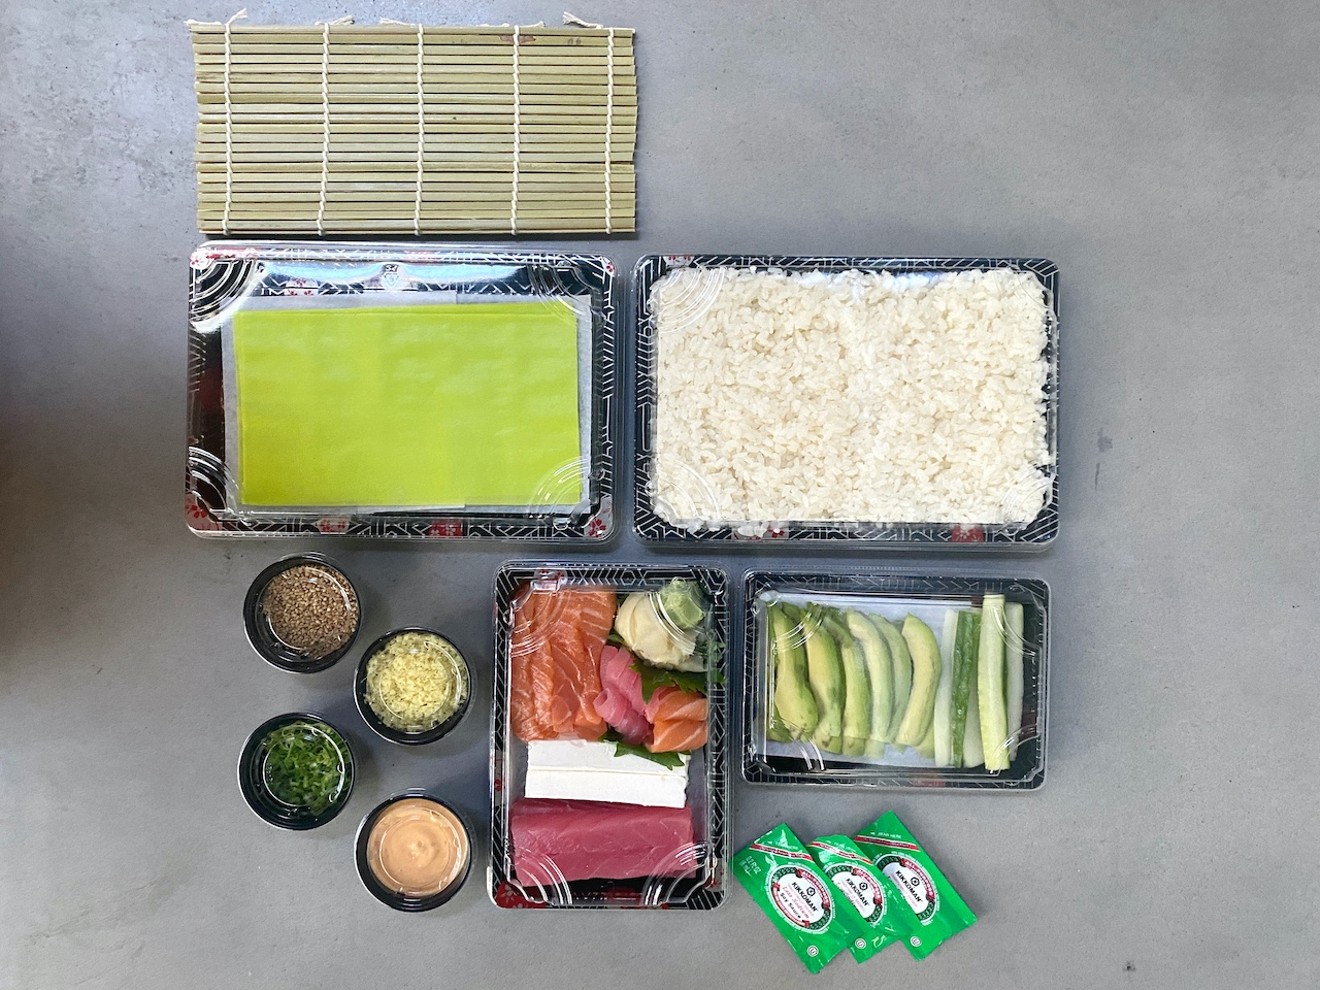 DIY Food Kits To Experience Restaurant-Style Meals